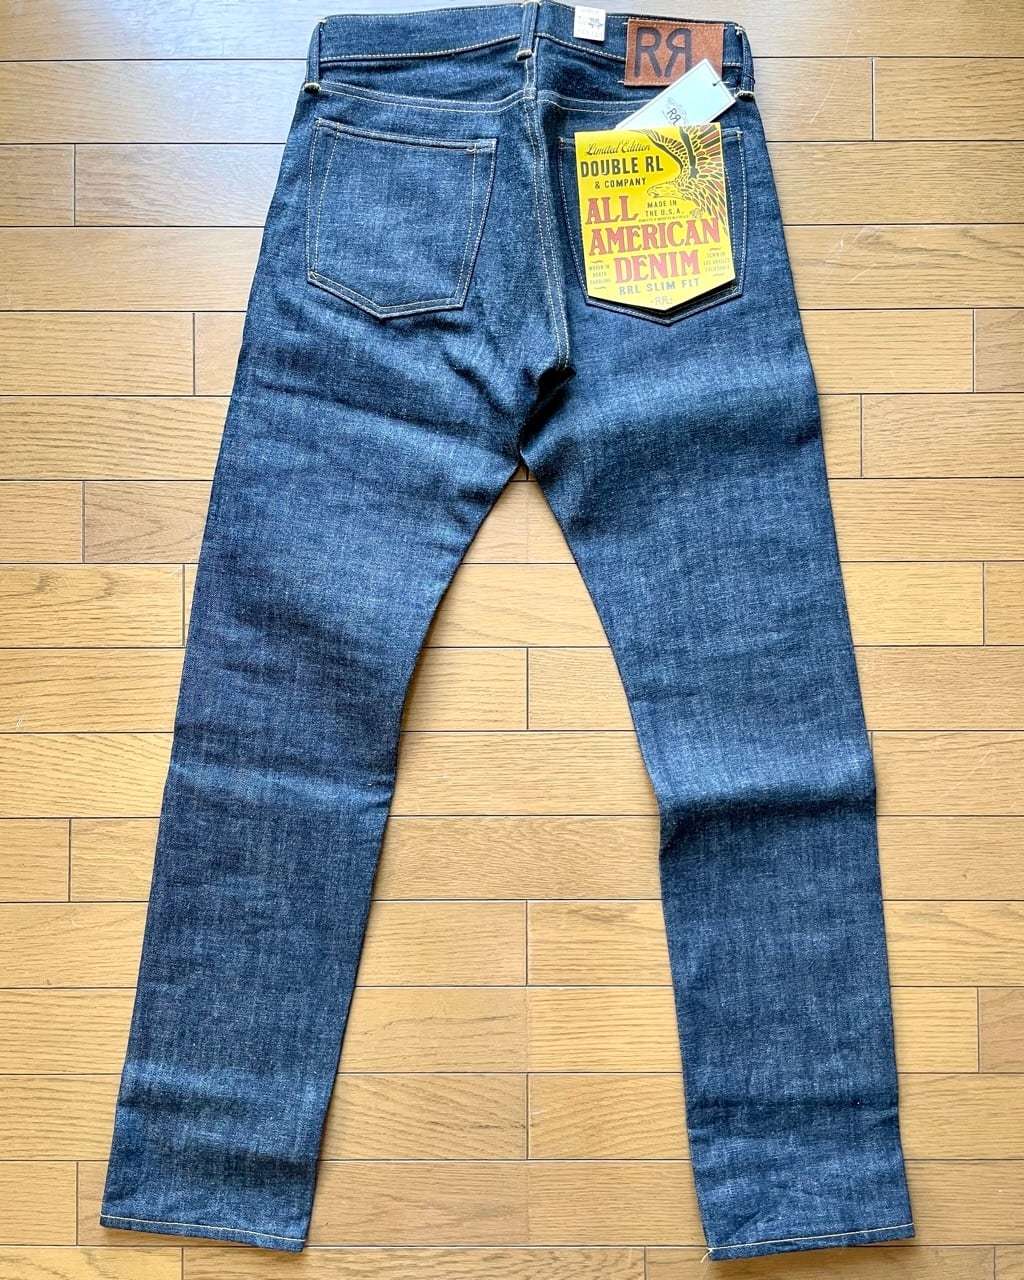 NOS新古品 RRL 米国製 オールアメリカン リジットデニム W L   Room Style Store powered by BASE